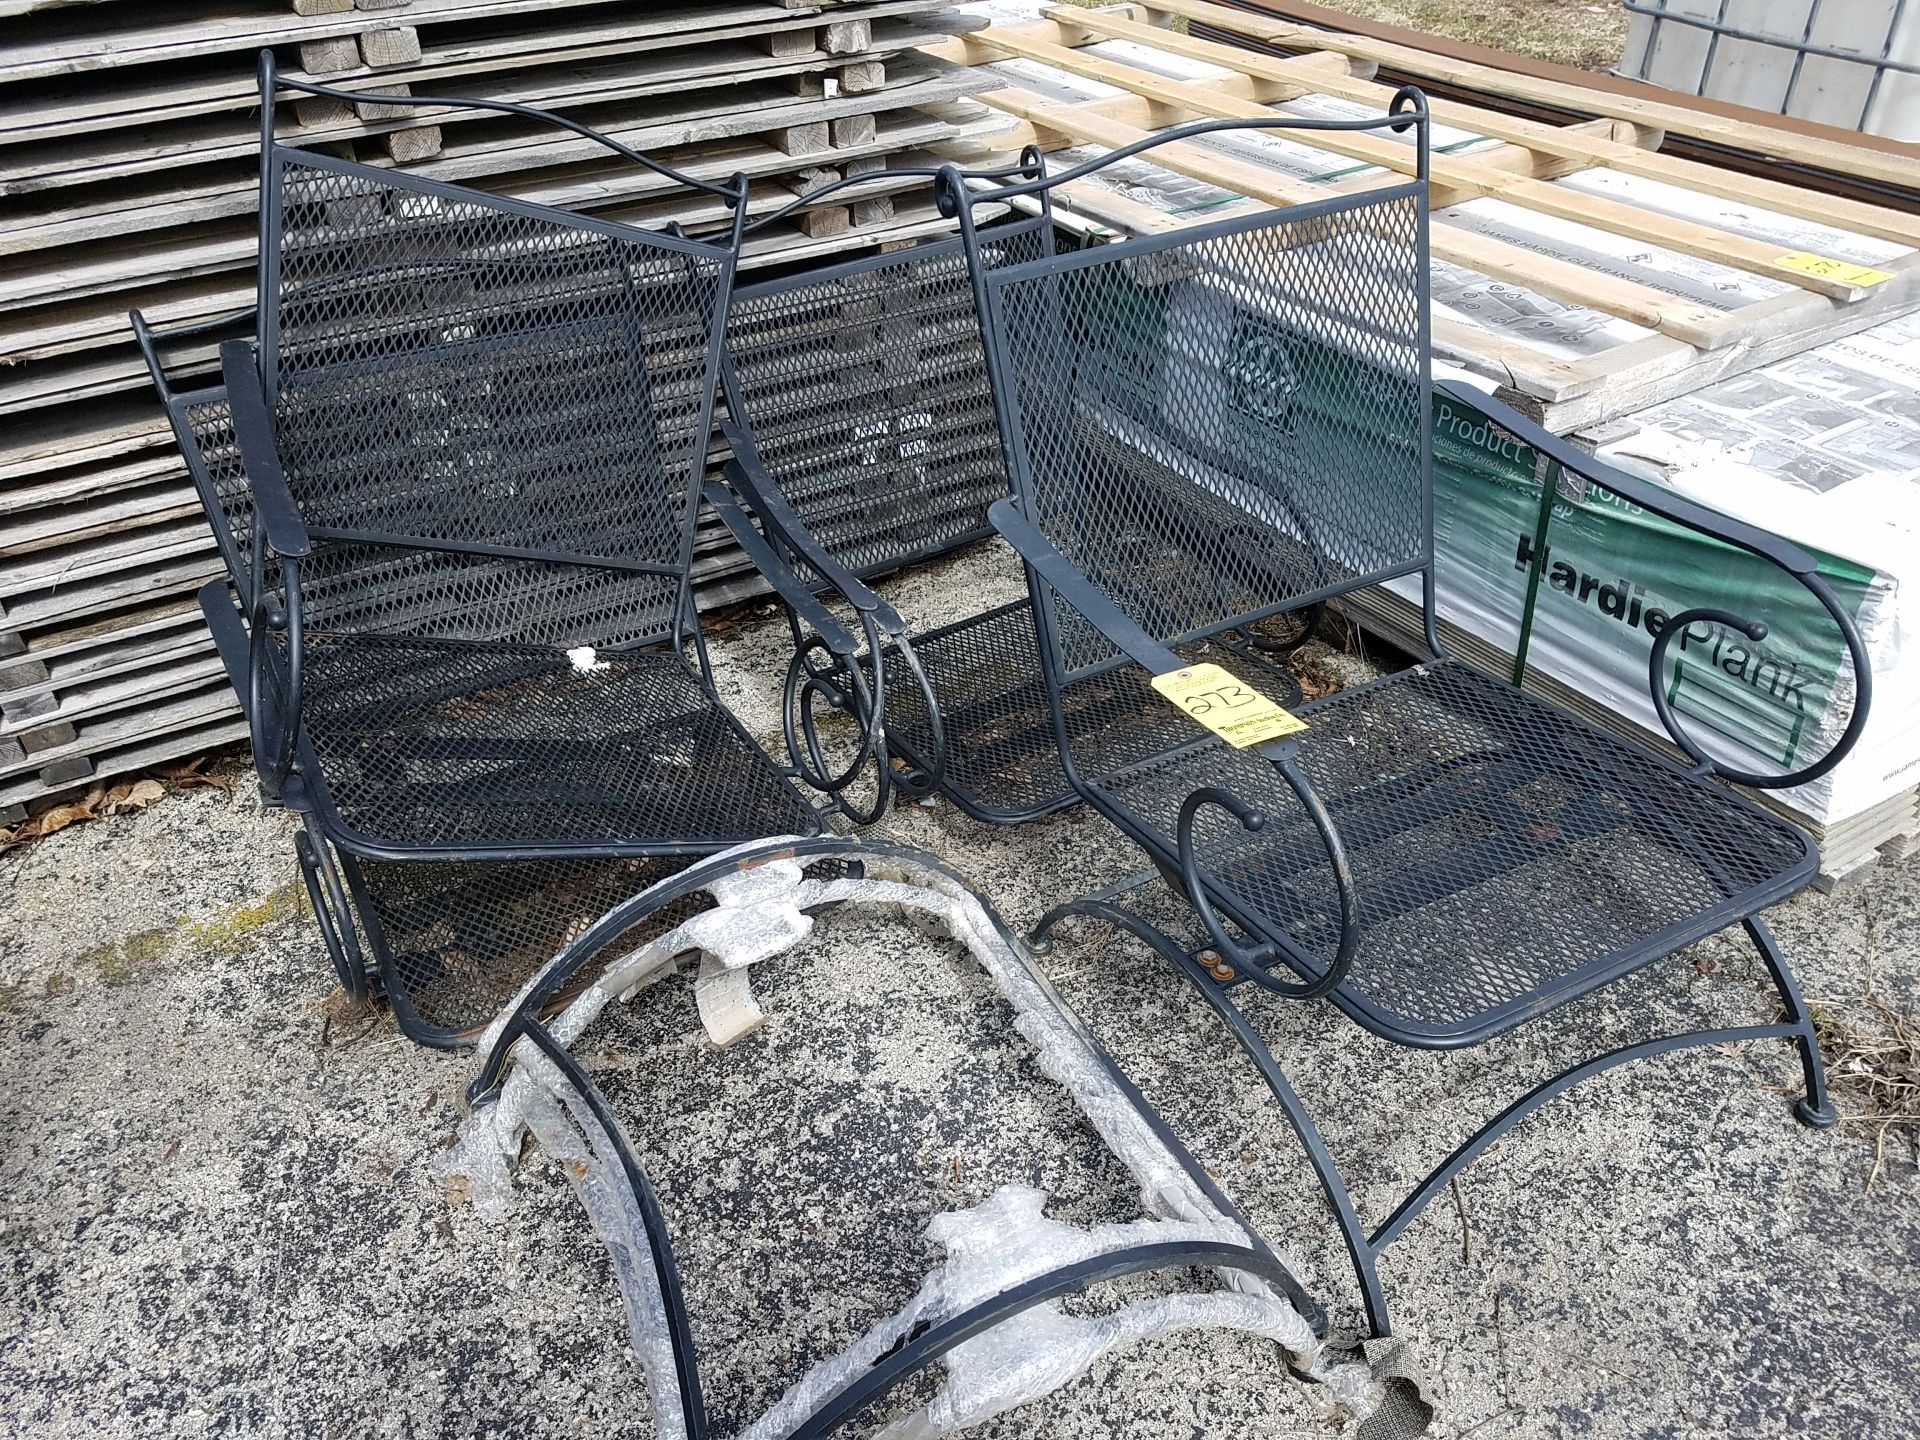 (4) Metal Outdoor Chairs